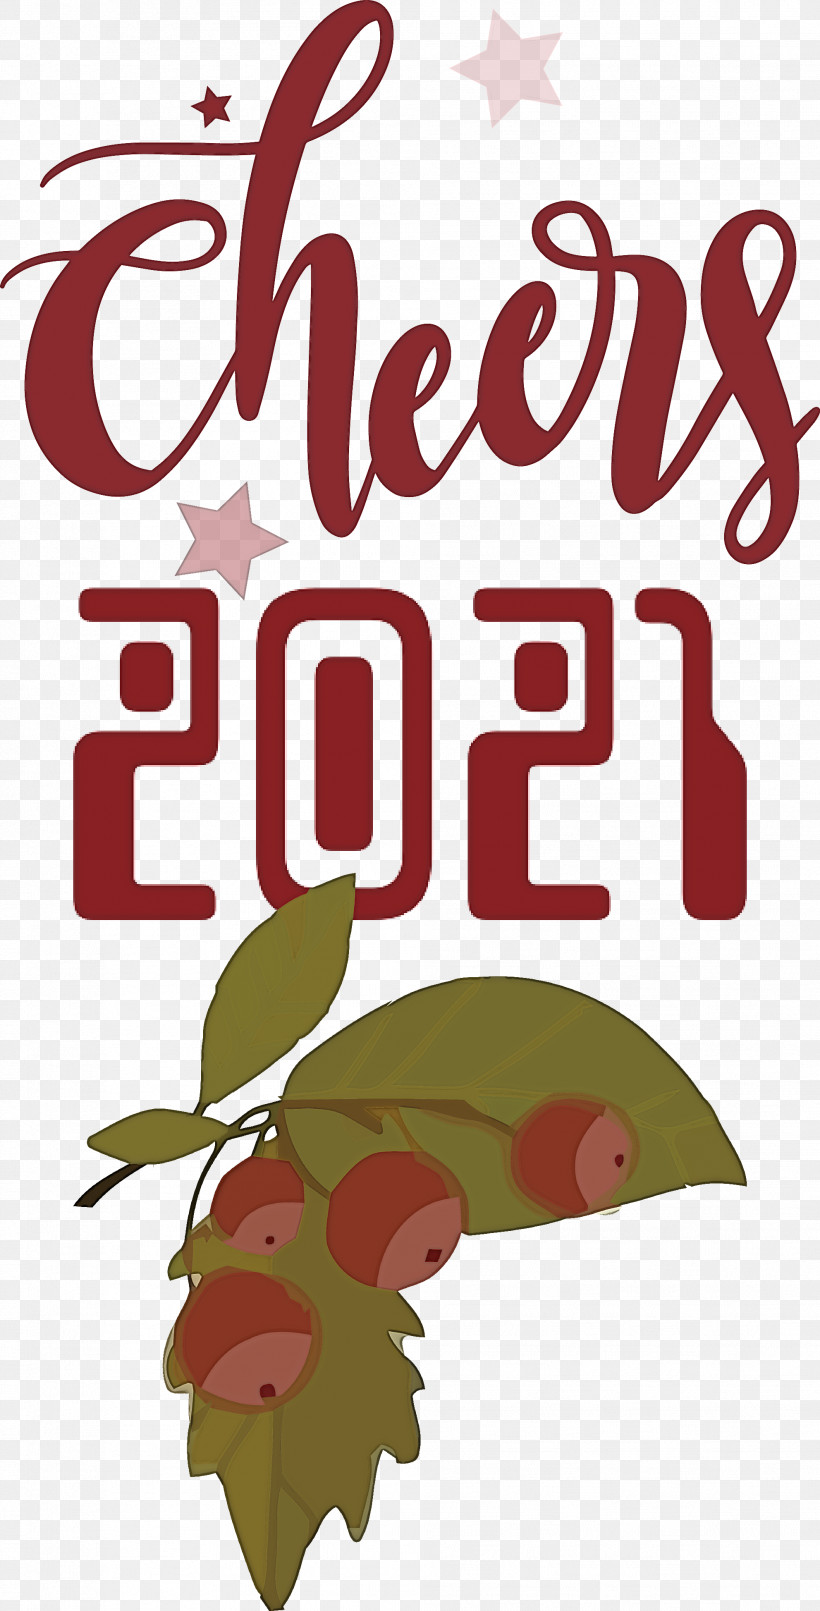 Cheers 2021 New Year Cheers.2021 New Year, PNG, 1983x3896px, Cheers 2021 New Year, Editing, Free, Poster, Silhouette Download Free